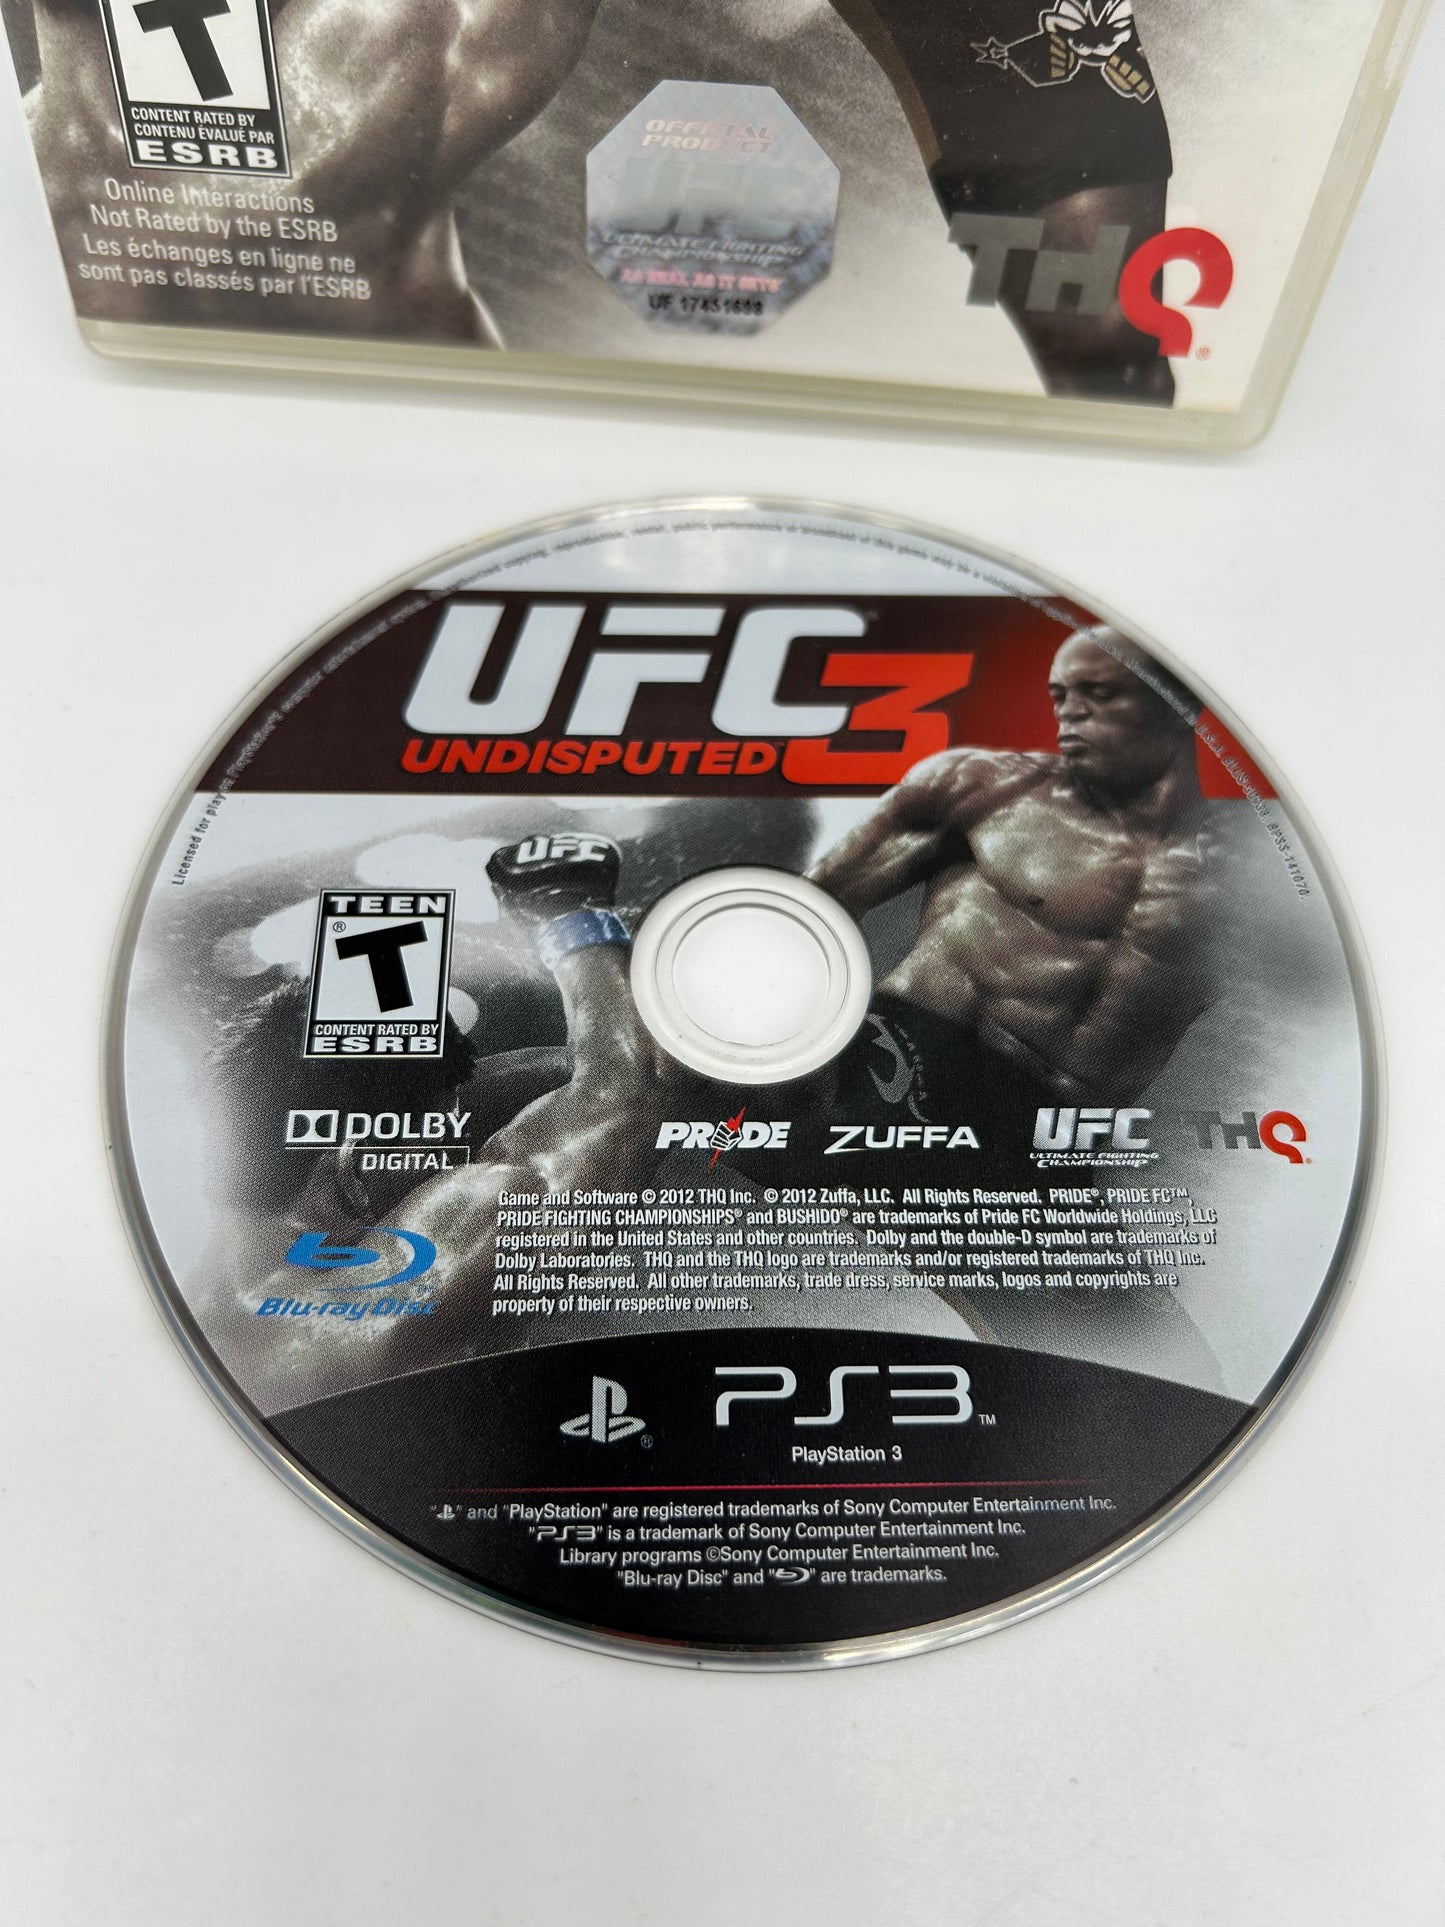 SONY PLAYSTATiON 3 [PS3] | UFC UNDiSPUTED 3